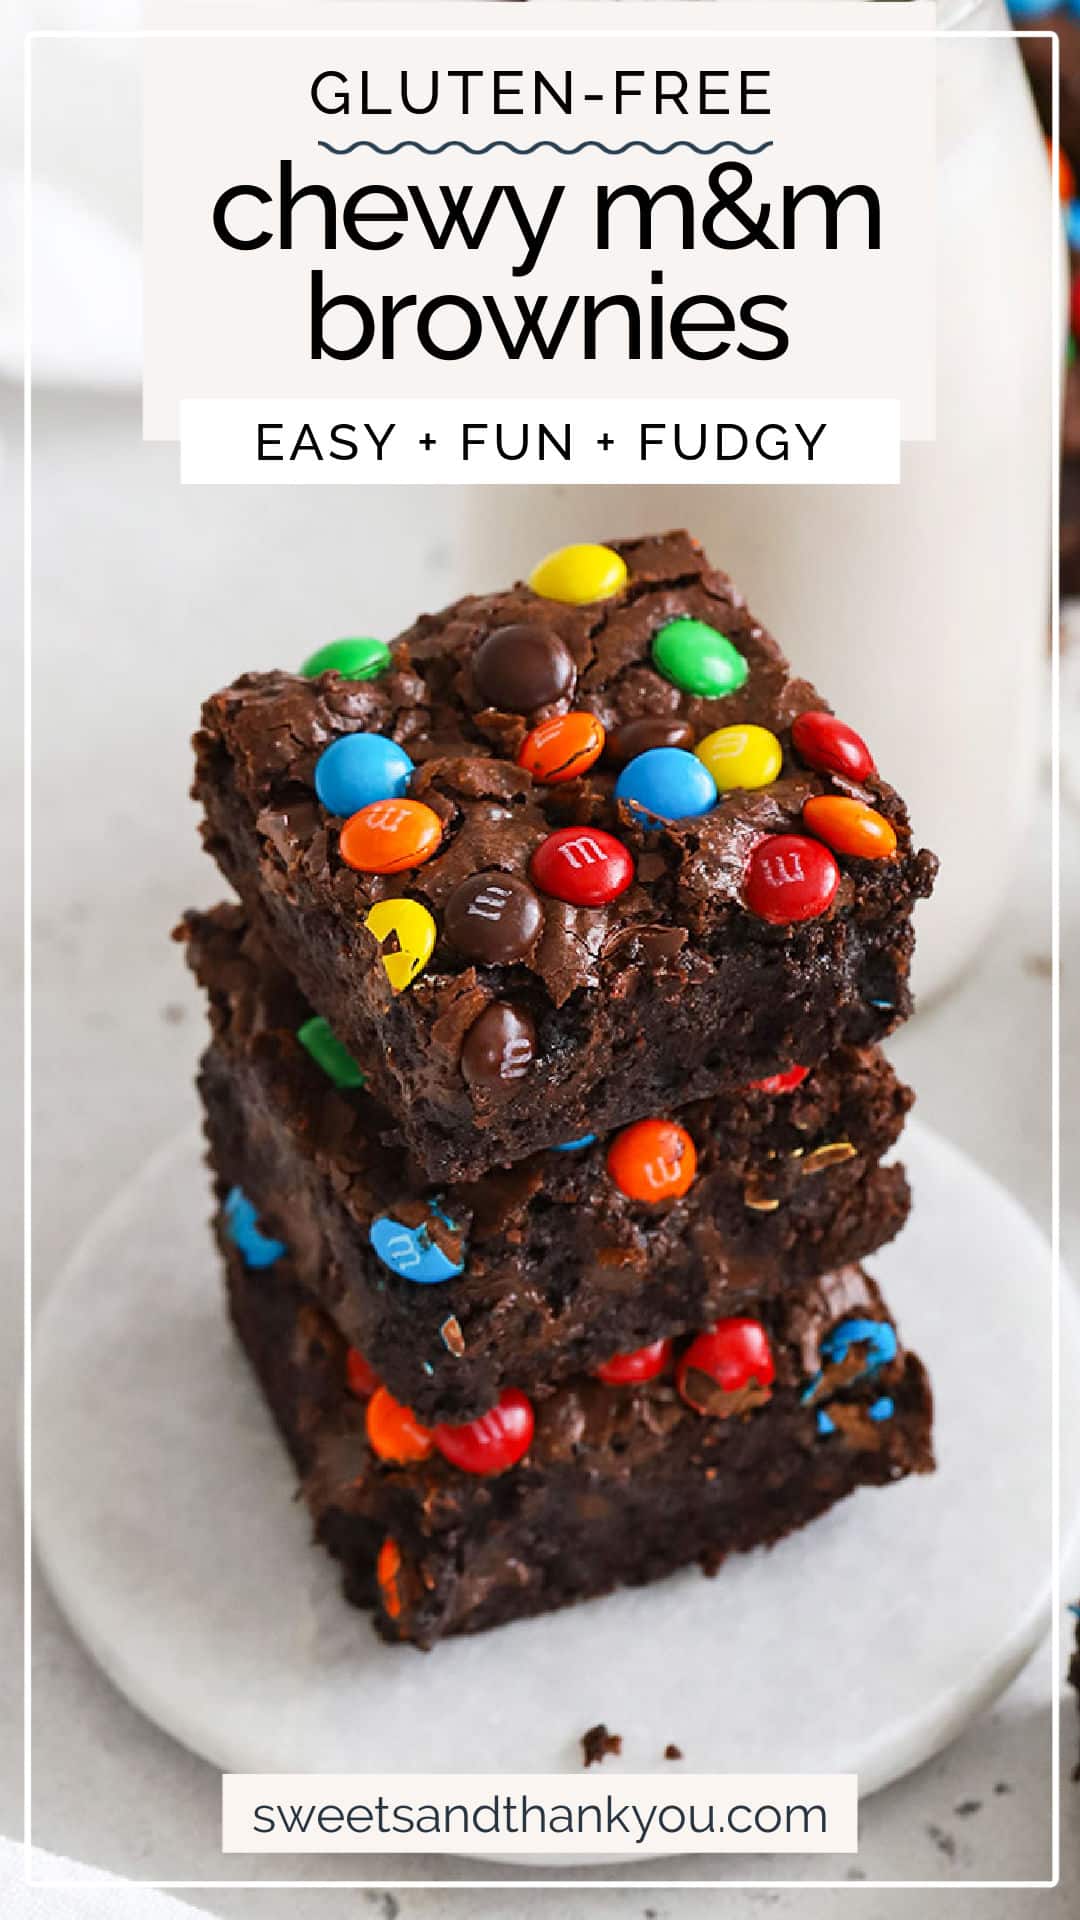 Gluten-Free M&M Brownies - Chewy gluten-free brownies topped with colorful M&Ms! These are such a fun, easy gluten-free dessert! / Gluten-Free mm brownies / gluten-free M&M brownie recipe, easy gluten-free brownies / gluten-free brownies with m&ms / gluten-free m&m desserts / are m&ms gluten-free / 